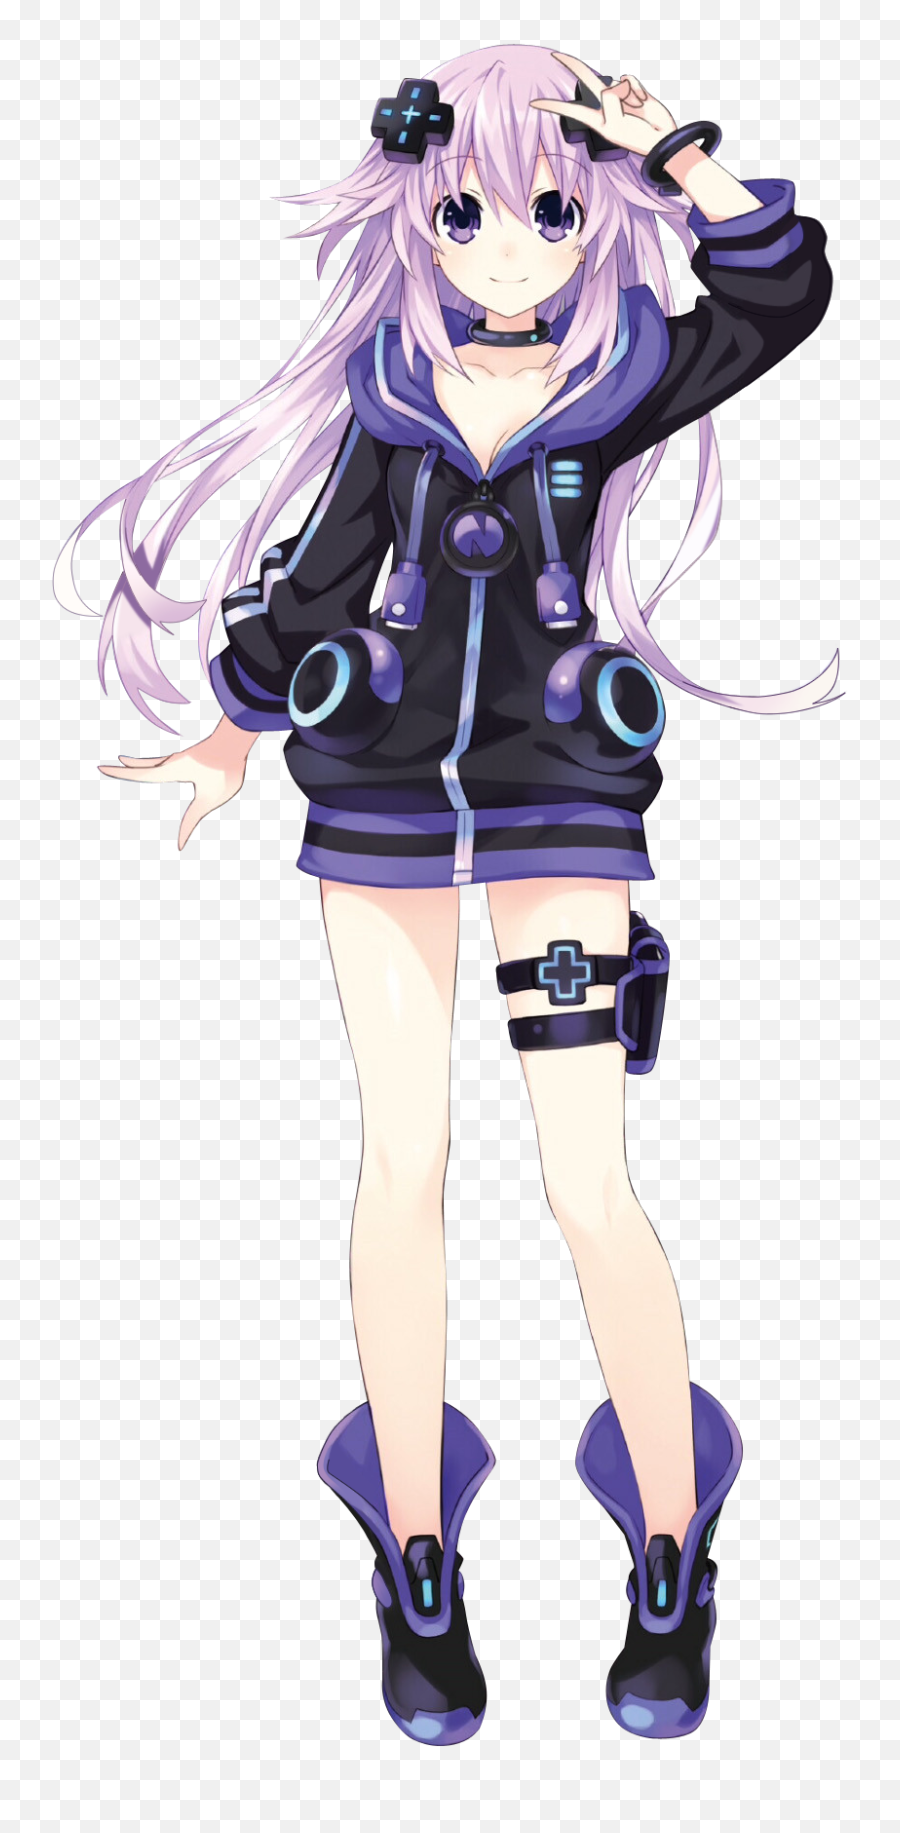 Can You Guys Give Me An Anime Character To Draw - Quora Adult Neptune Neptunia Emoji,Anime Emotion Sheet